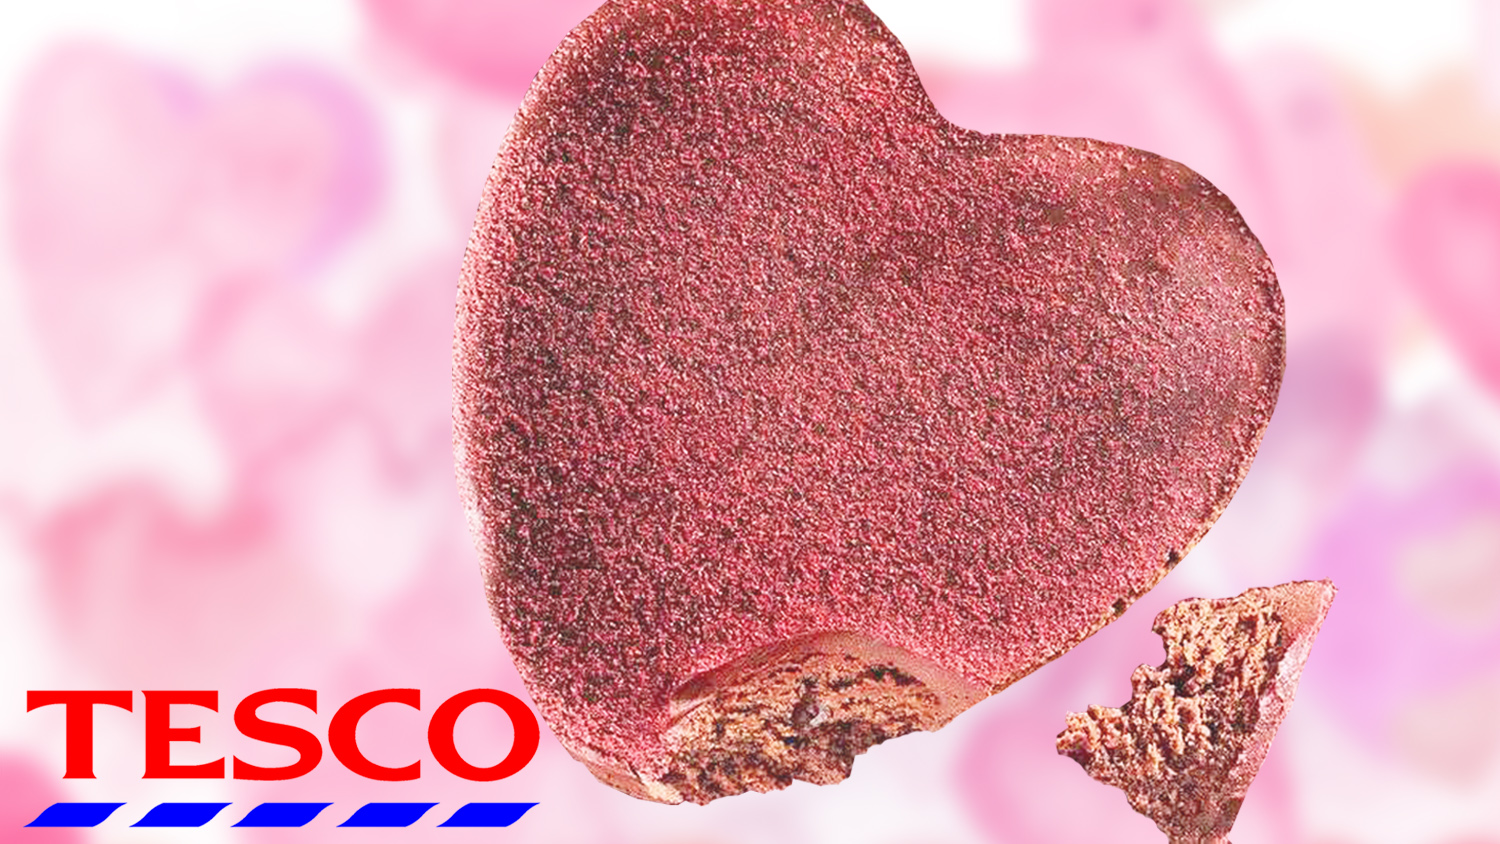 Tesco Made a Heart-Shaped Vegan Brownie Cake and It Has Over 14g Protein